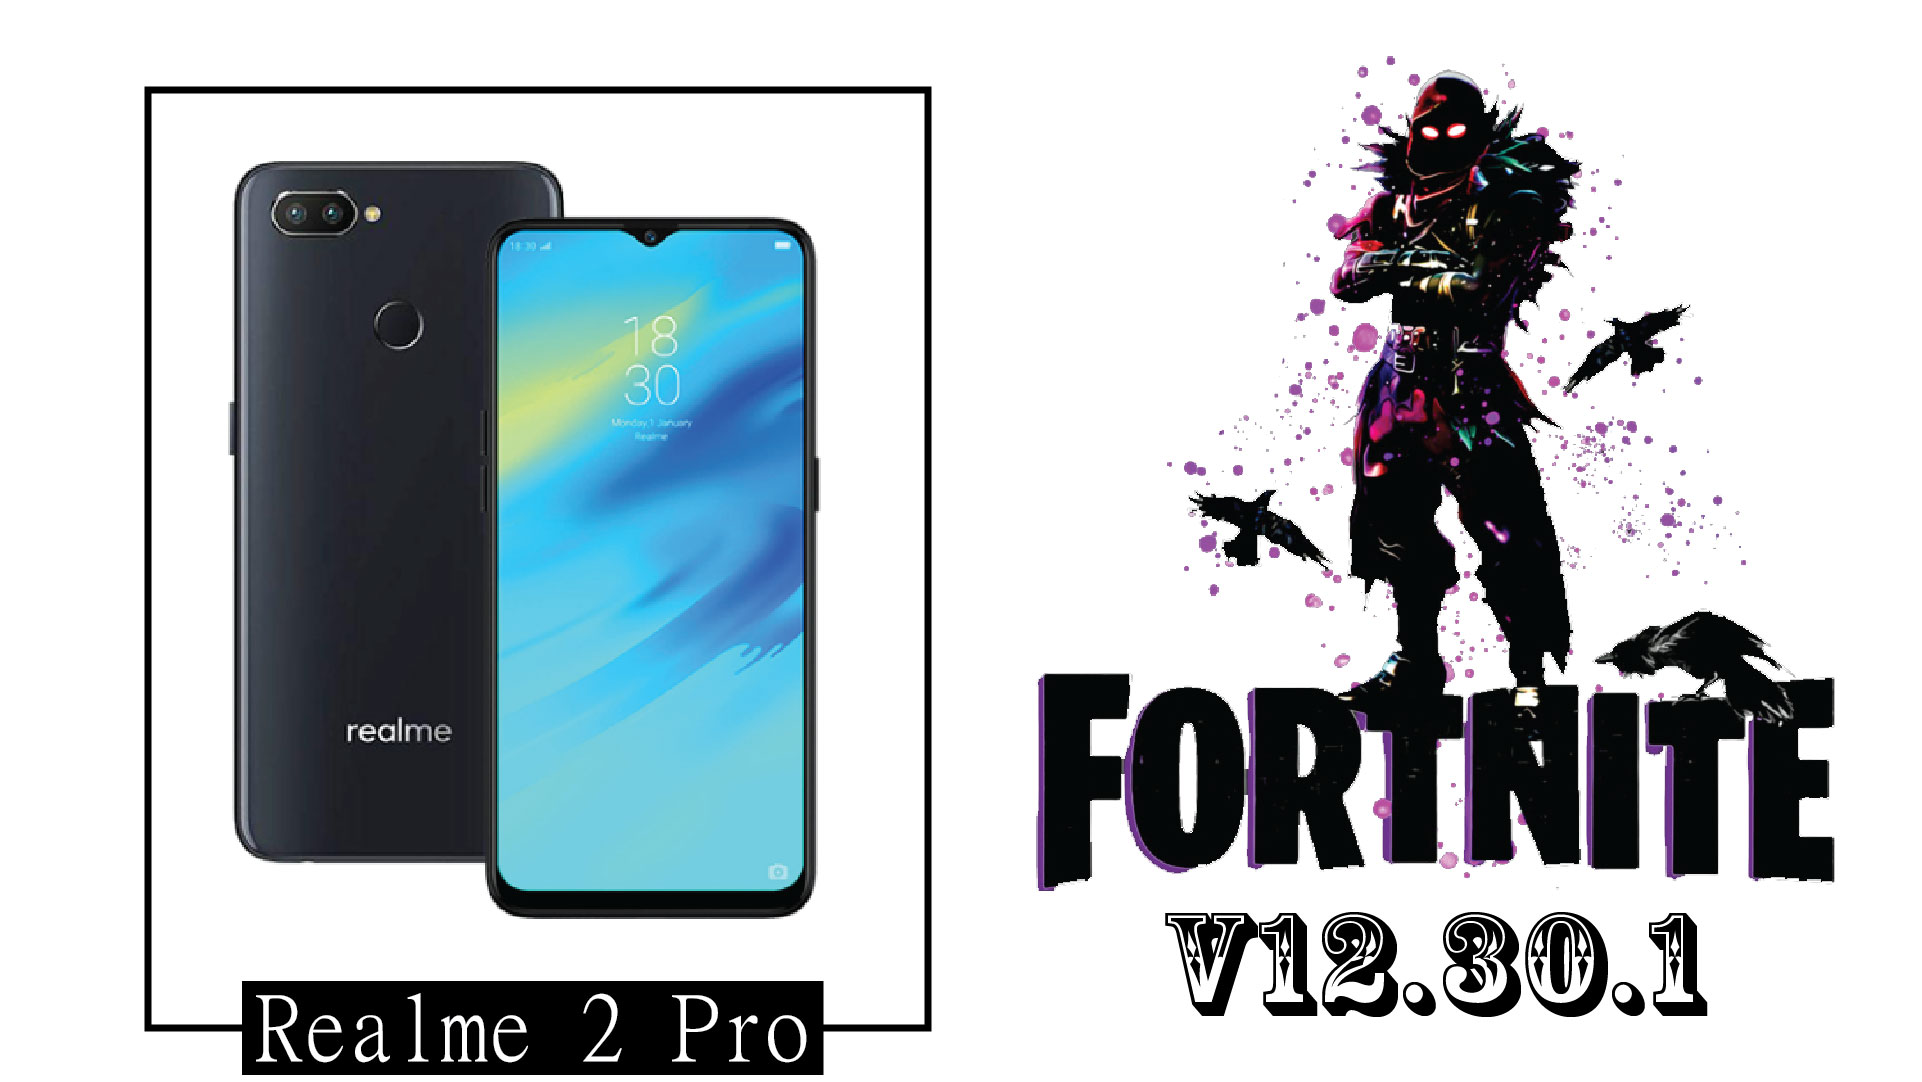 How To Install Fortnite Apk Fix Device Not Supported For ... - 1922 x 1082 jpeg 214kB